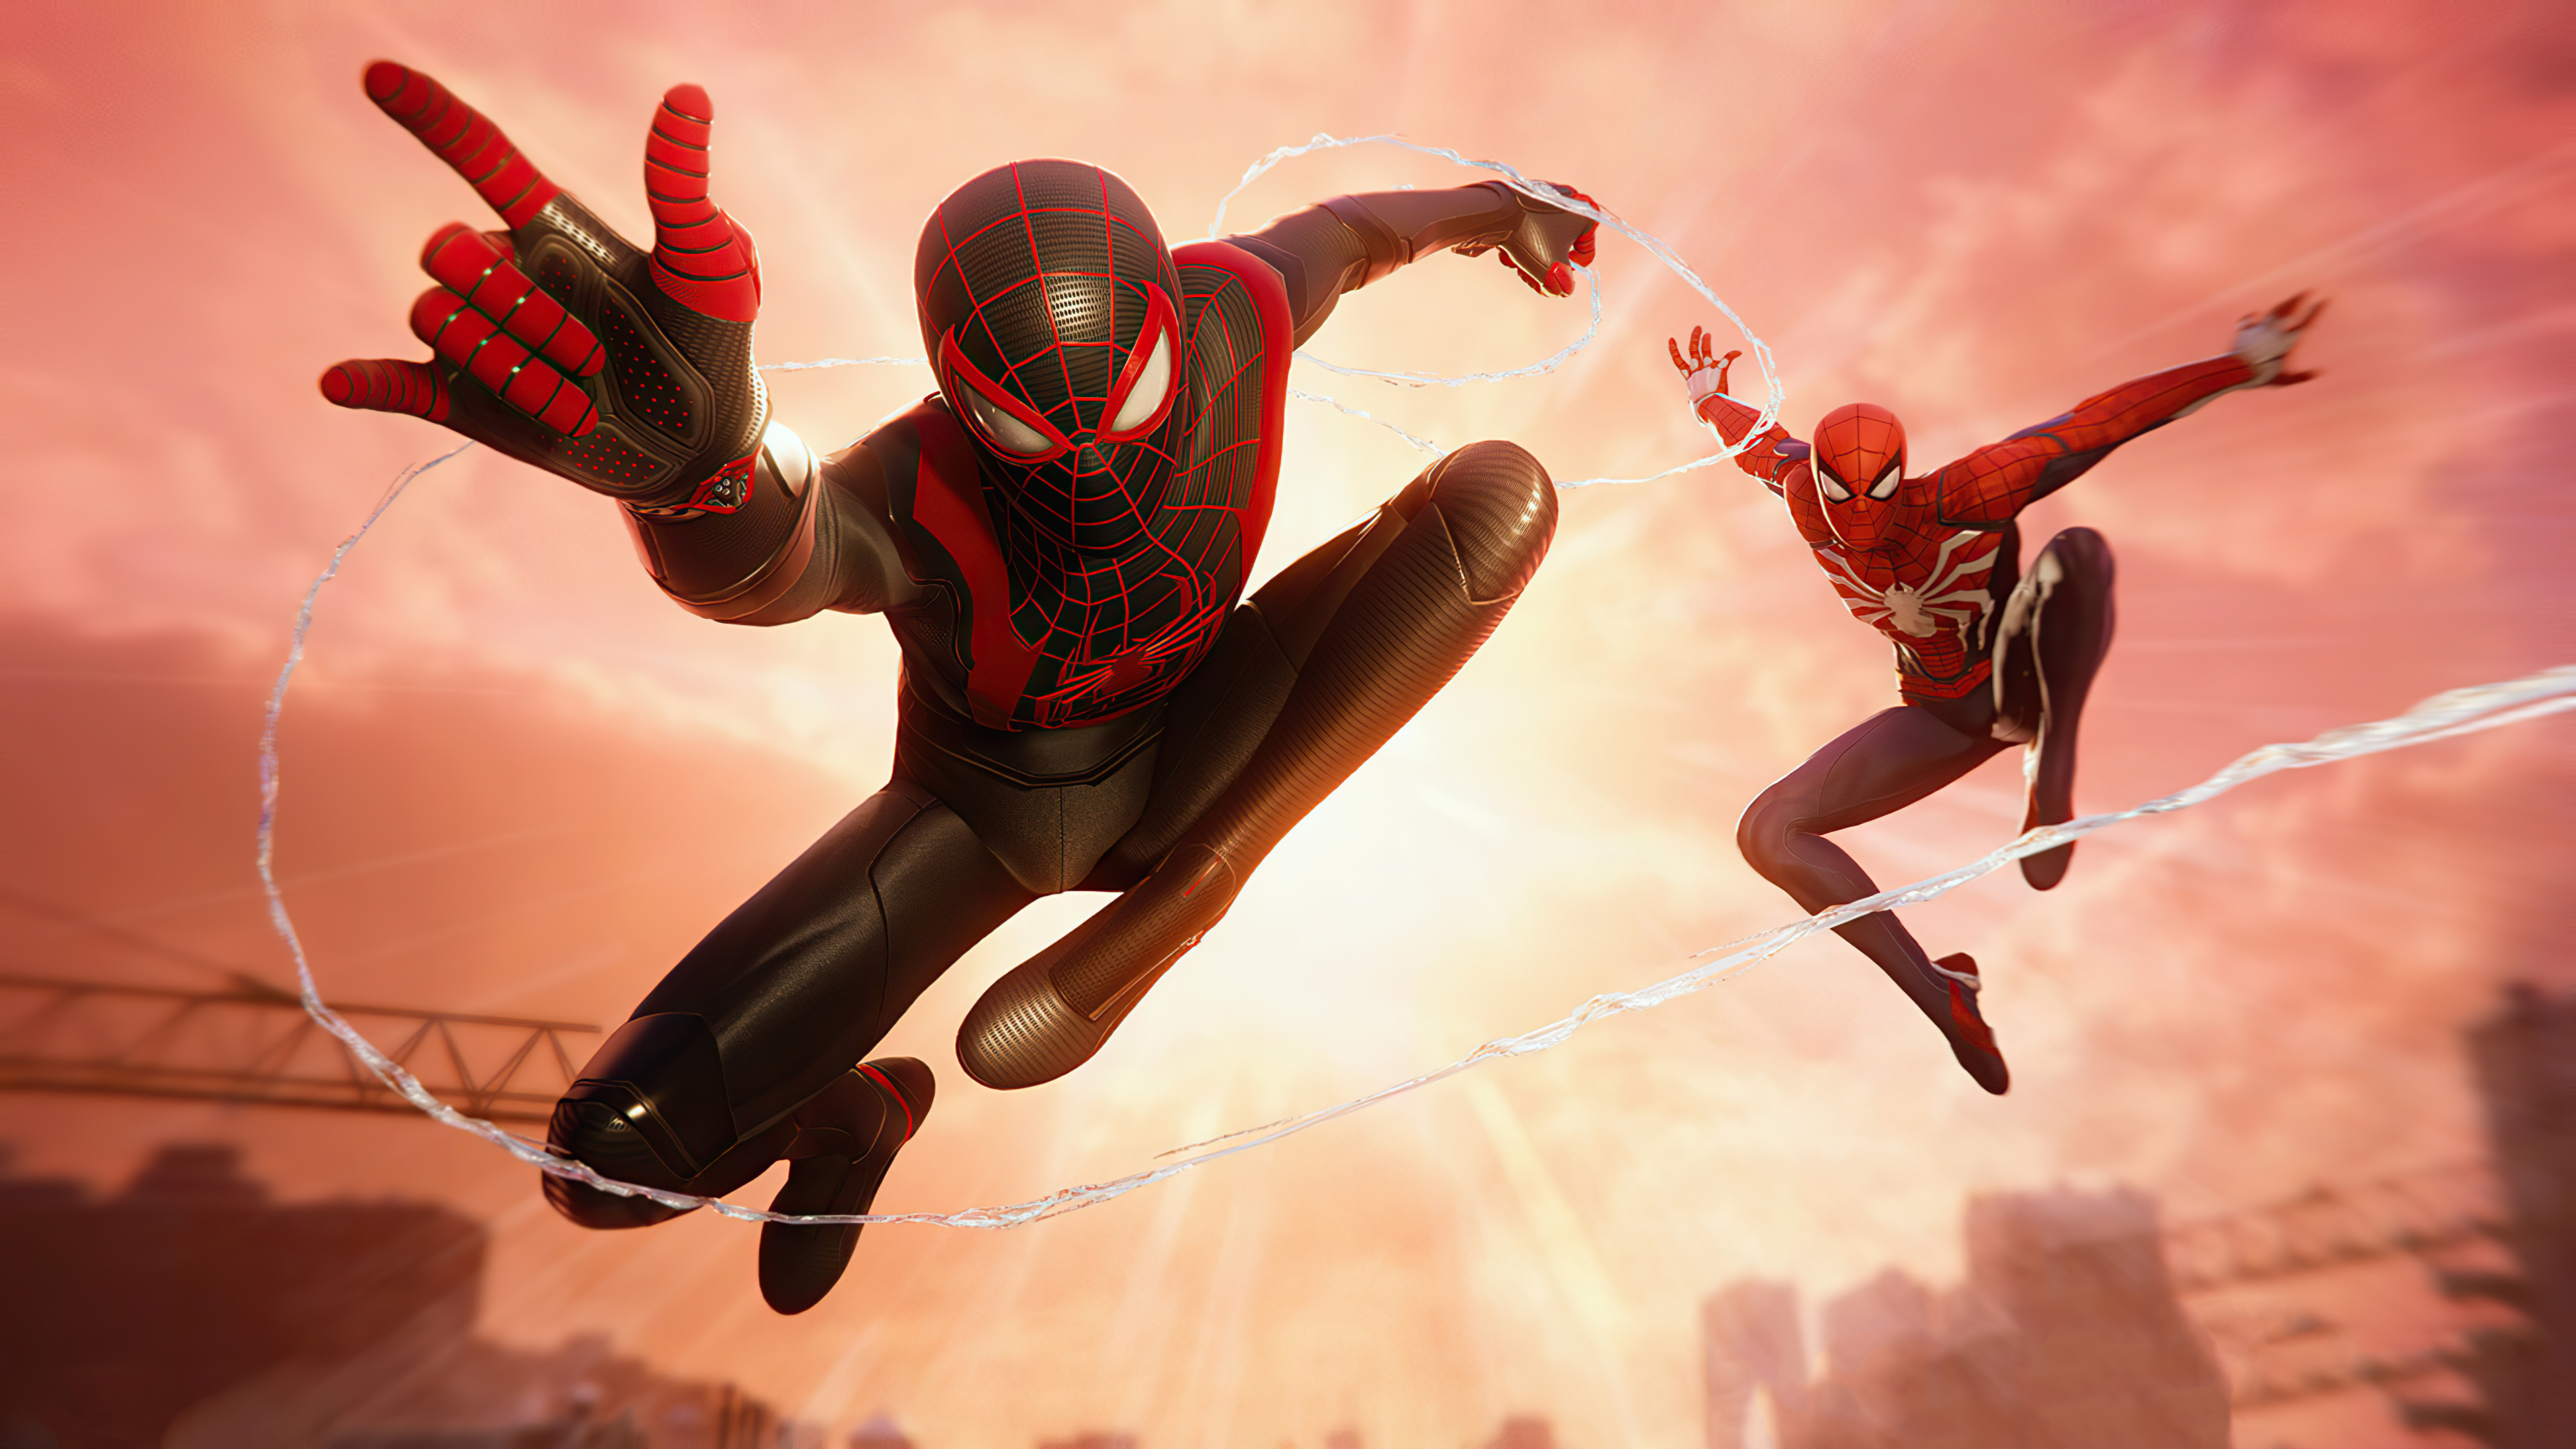 marvel's spider man: miles morales, miles morales, spider man (ps4), spider man, video game, peter parker lock screen backgrounds